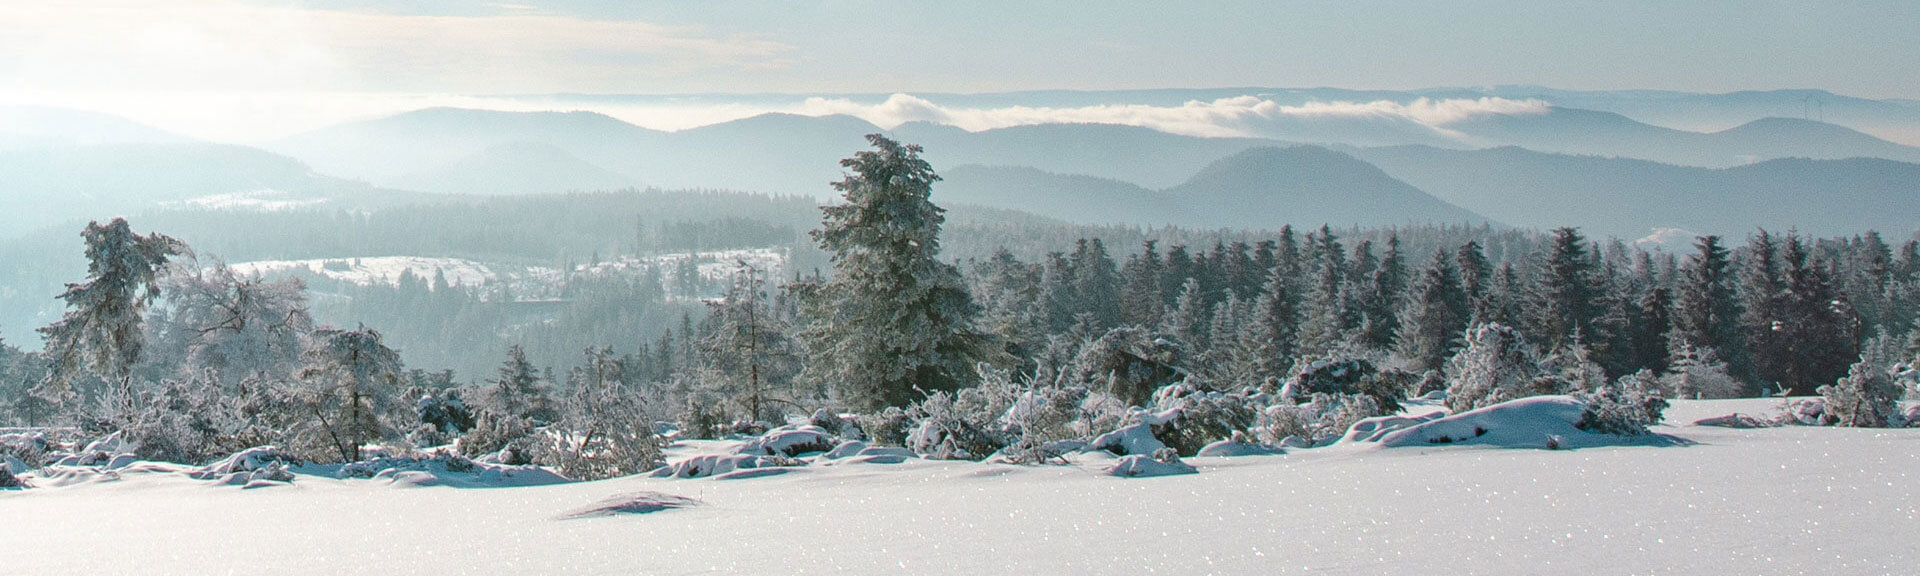 snowy landscape in the black forest